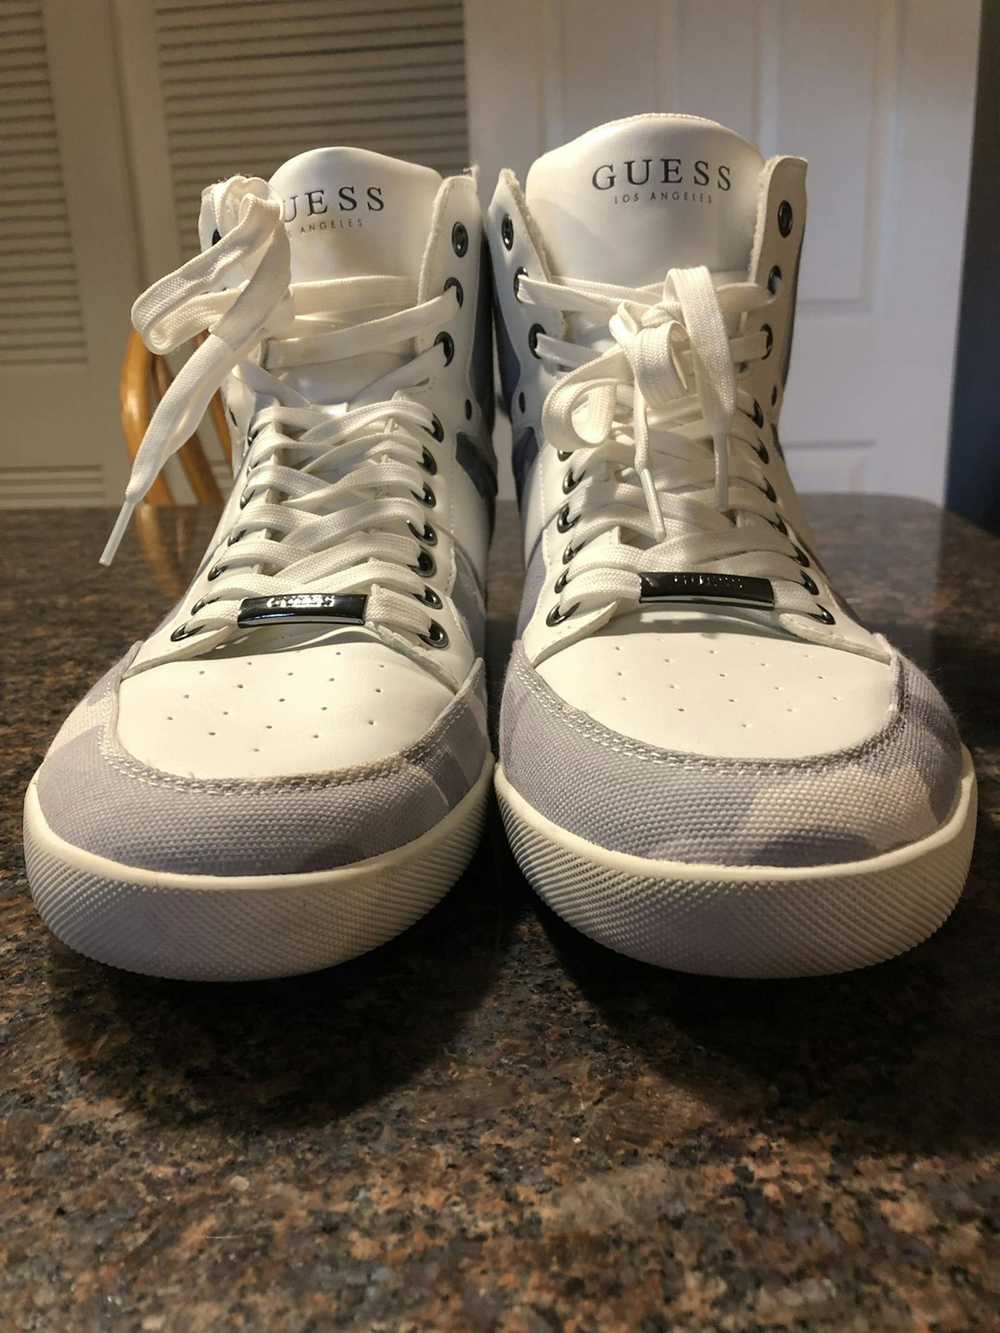 Guess Guess high top shoe very clean light use - image 5